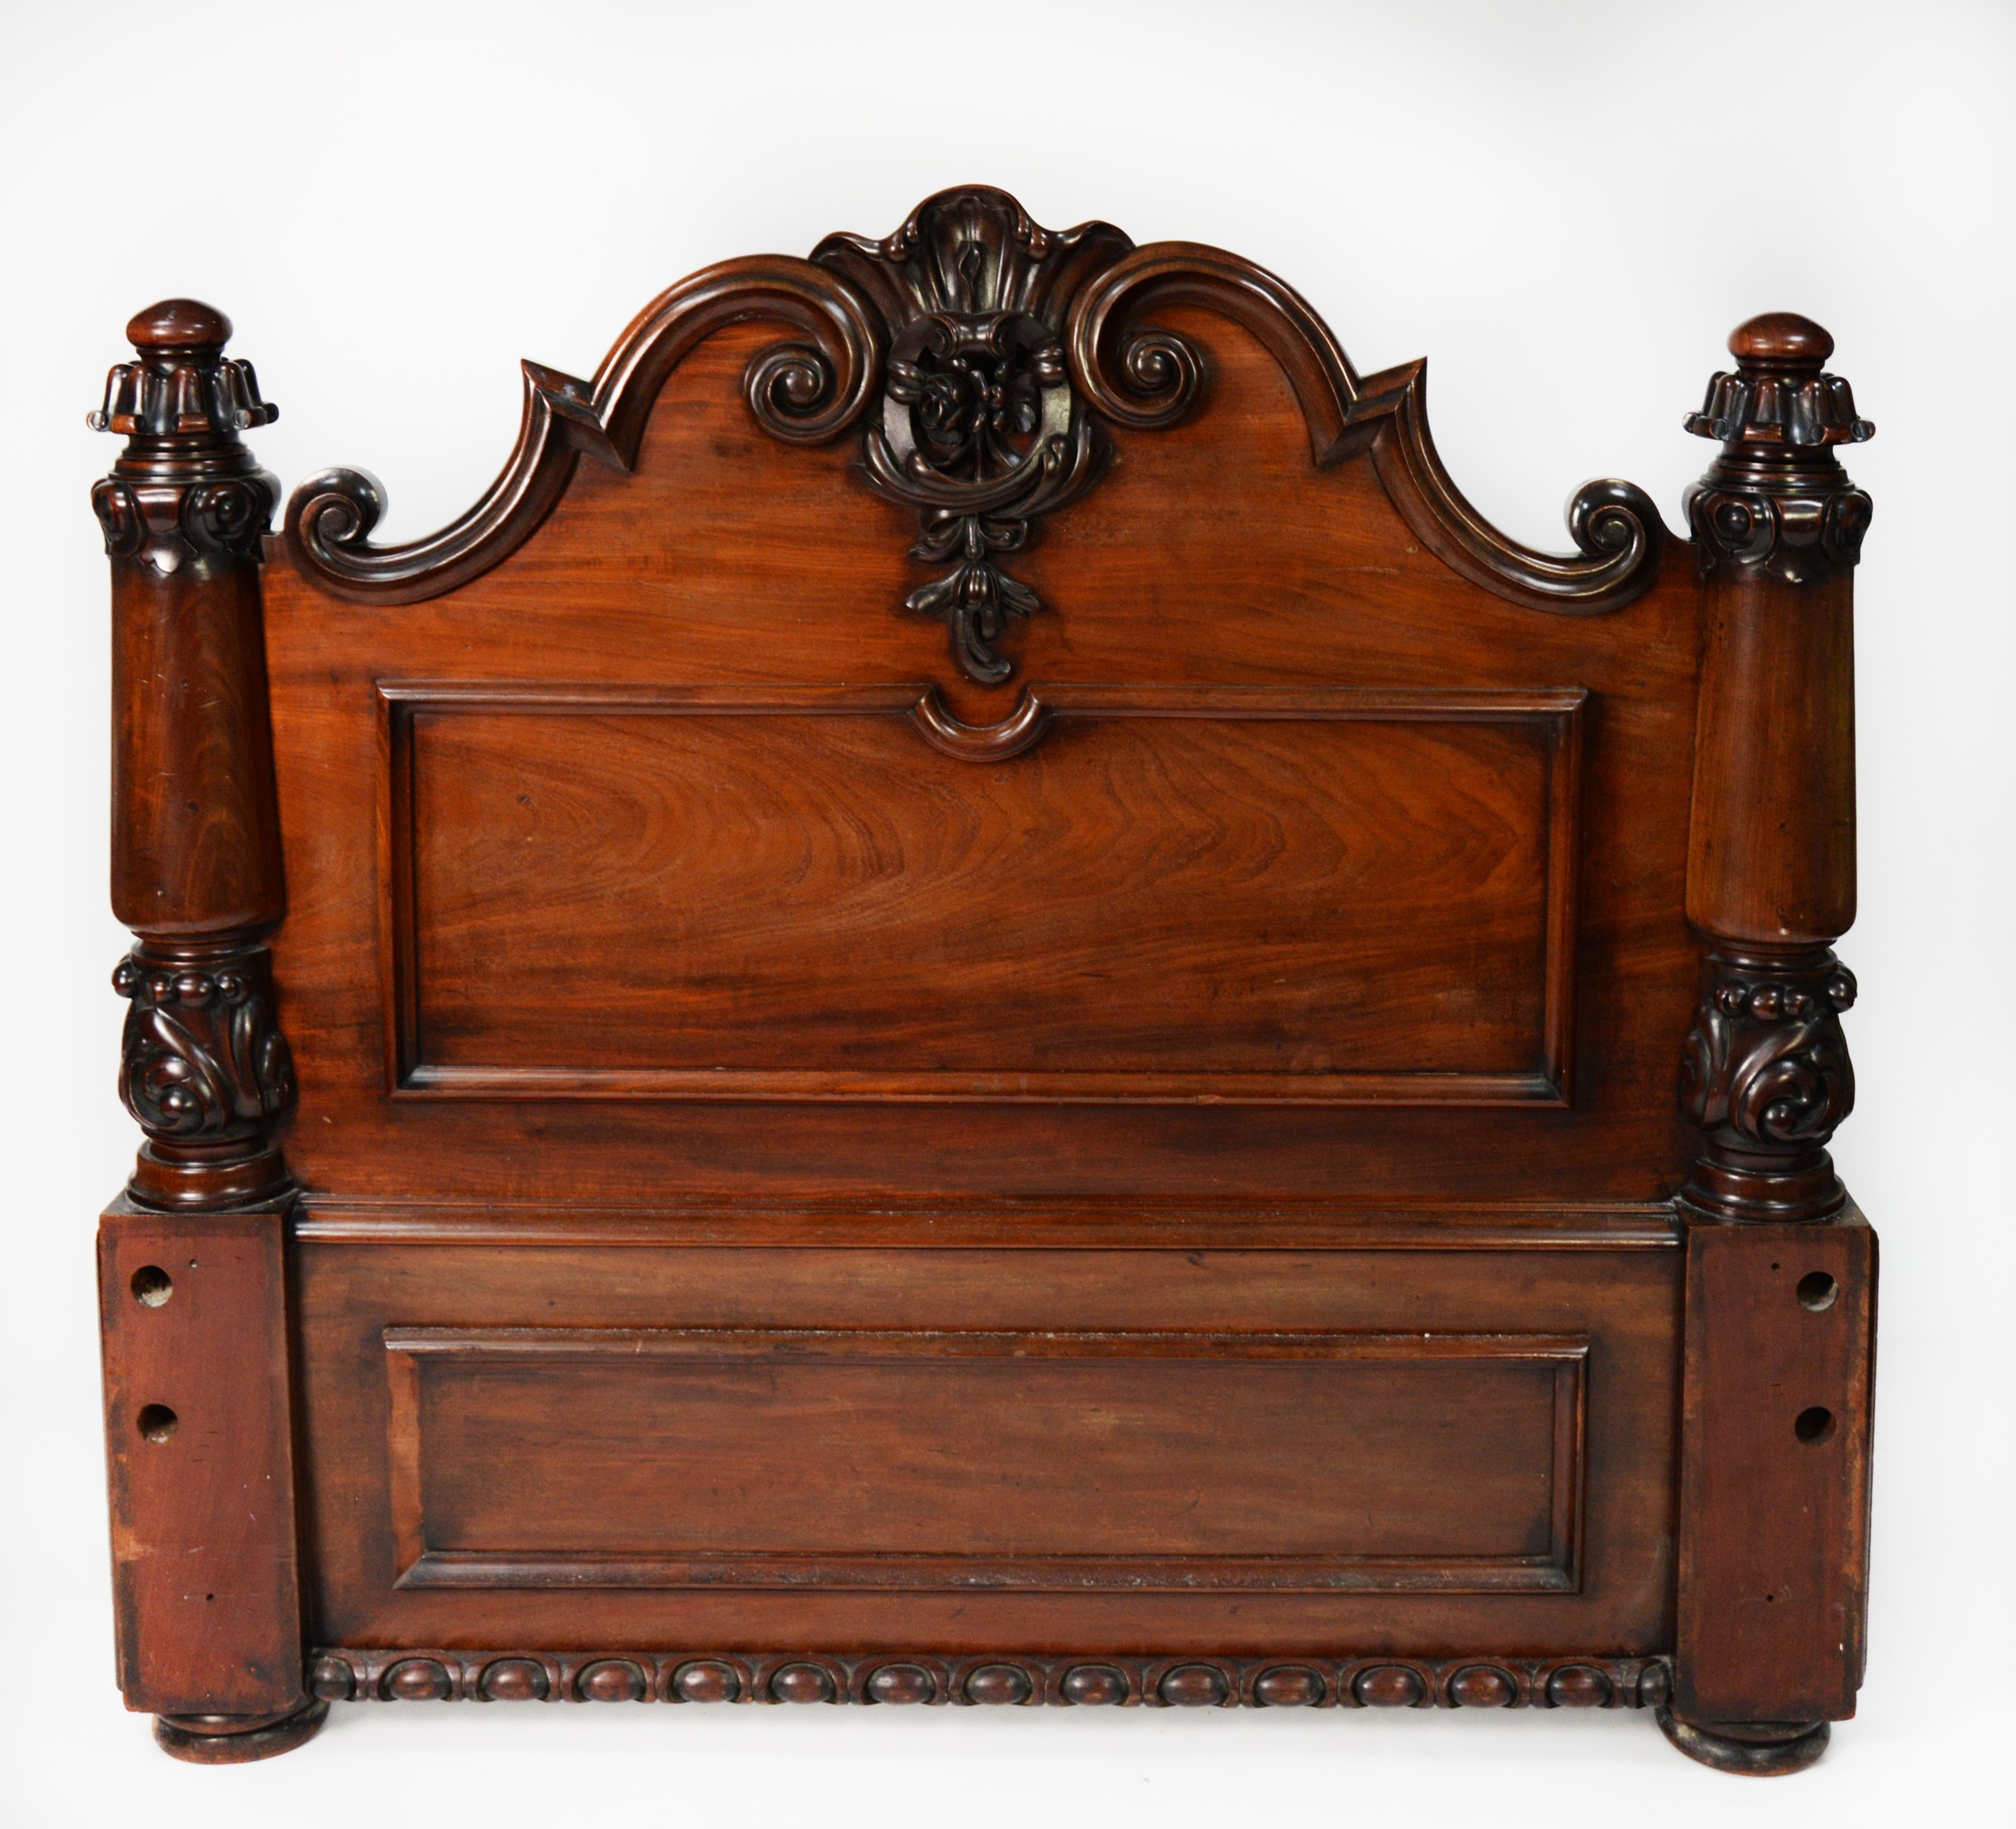 NINETEENTH CENTURY HEAVY CARVED MAHOGANY FOOTBOARD FOR A HALF TESTER BED, with well carved shell